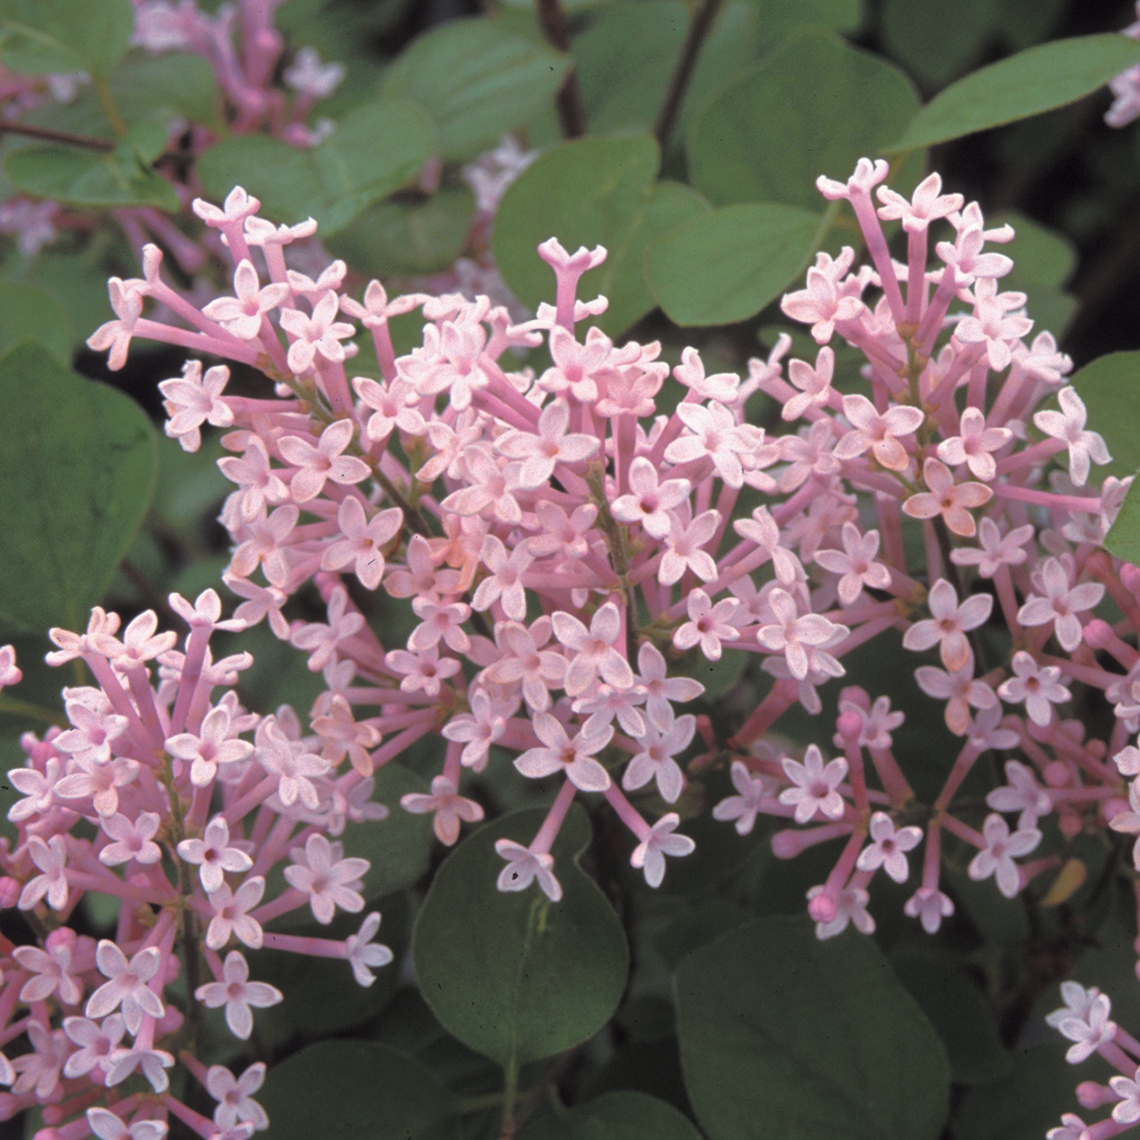 A closeup of the pink flowers of Palibin lilac which have four petals each